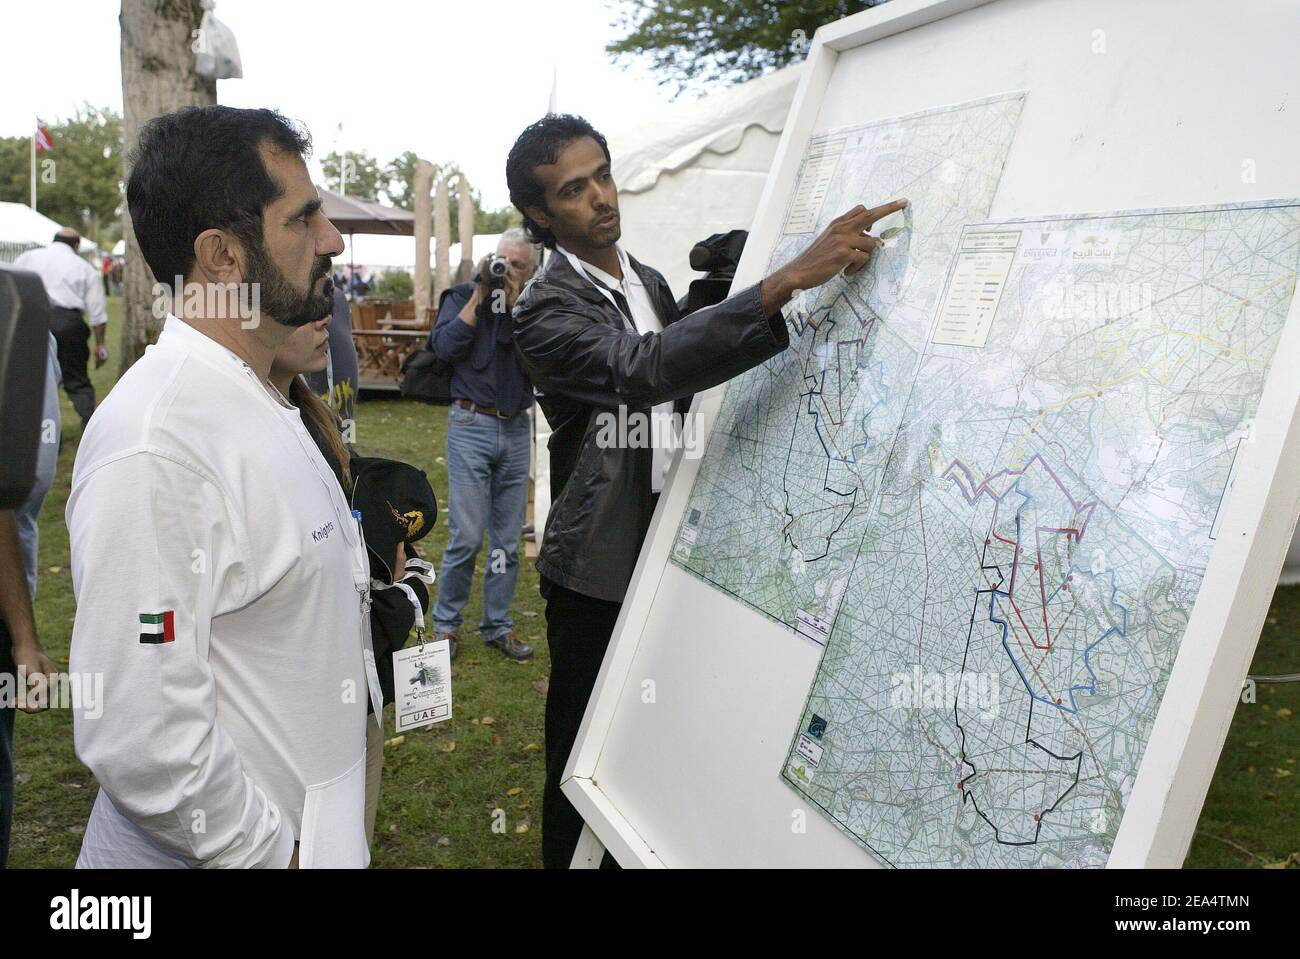 Sheikh Mohammed Al Maktoum watch the map of is upcoming 160 kms endurance race as part of the Horse Endurance European championship in Compiegne, France on August 25, 2005. Photo by Edouard Bernaux/ABACAPRESS.COM Stock Photo